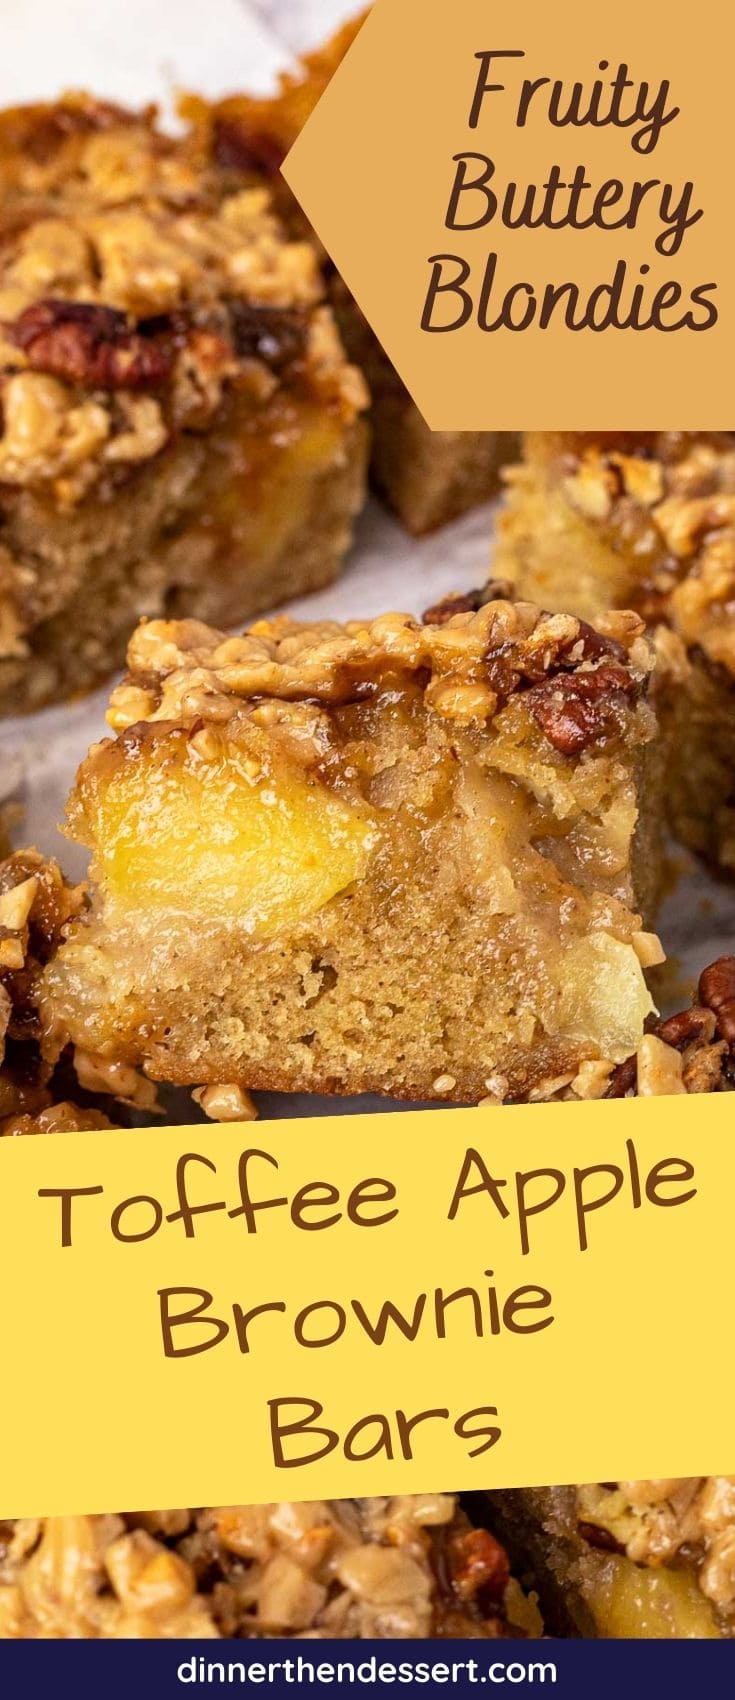 Toffee Apple Brownie Bars baked bars cut into squares and close up on one bar